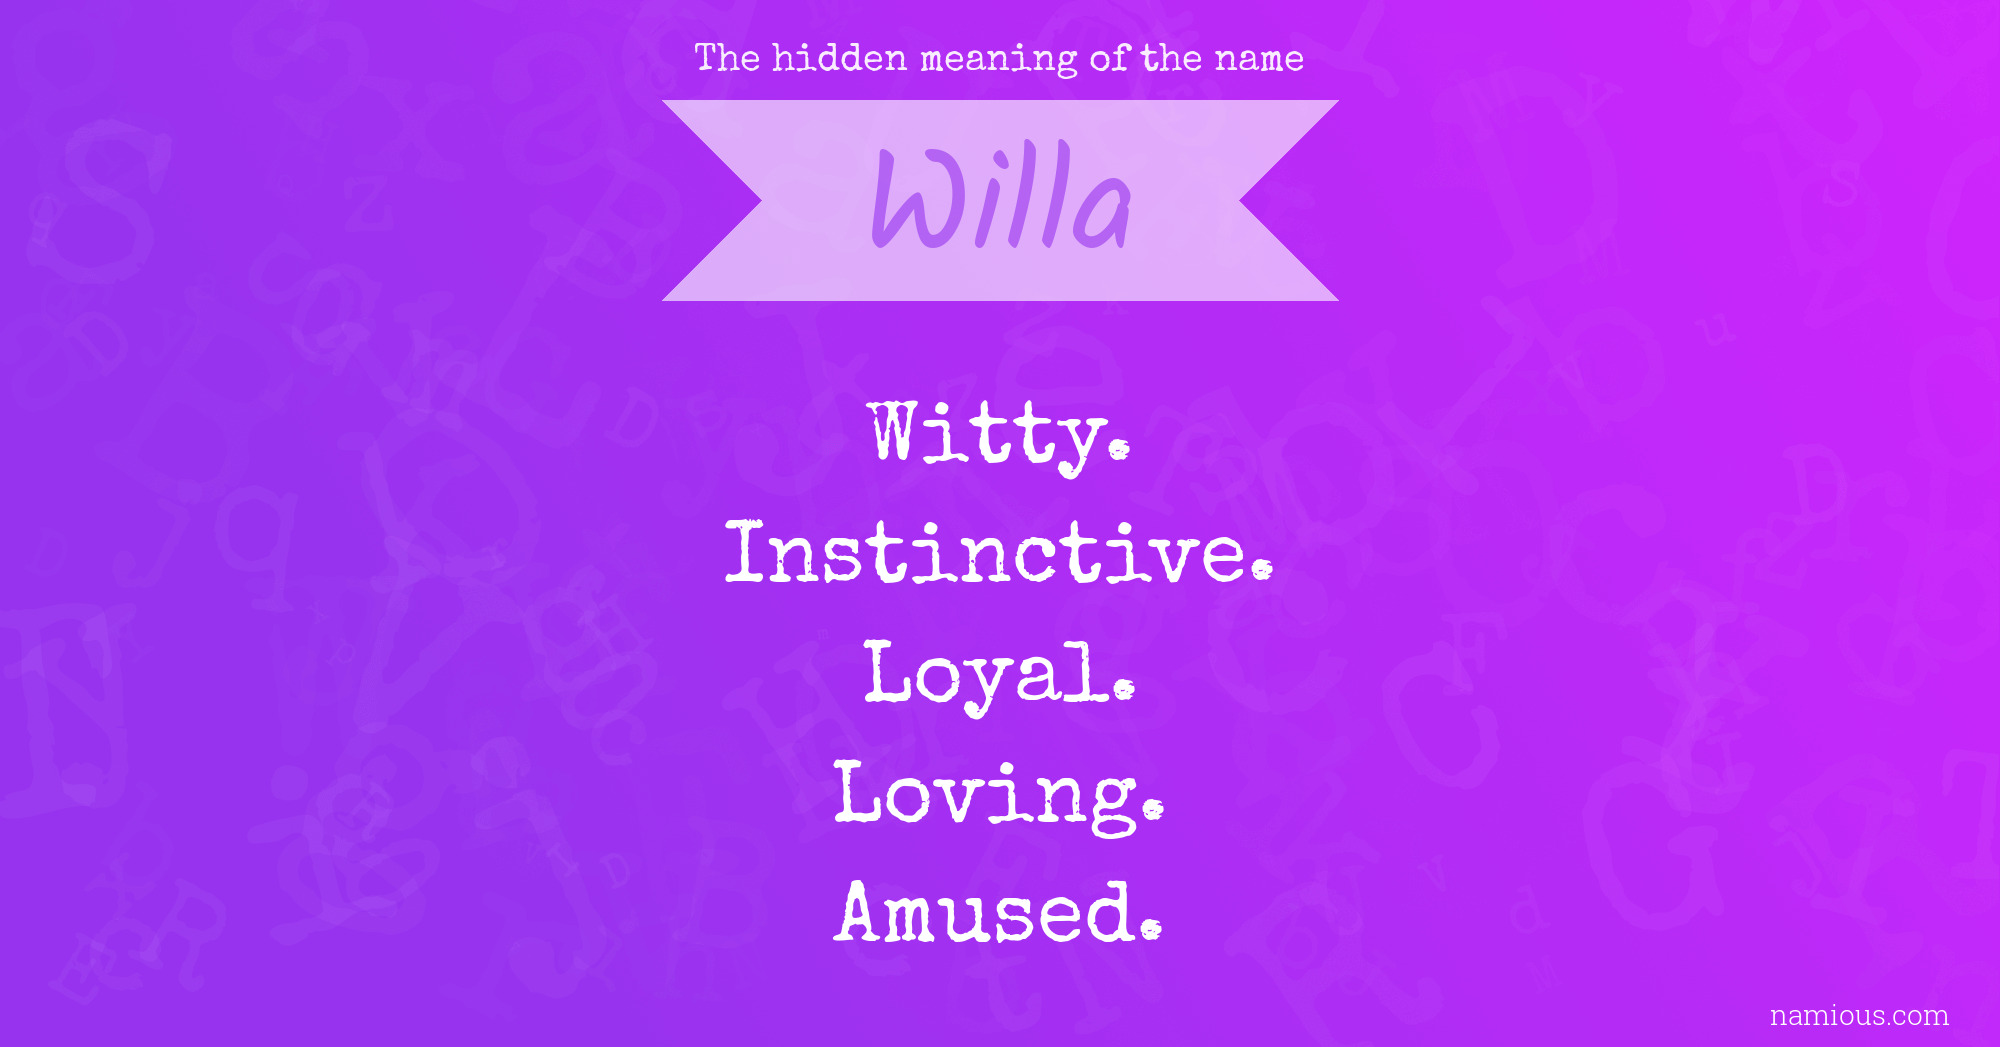 The hidden meaning of the name Willa